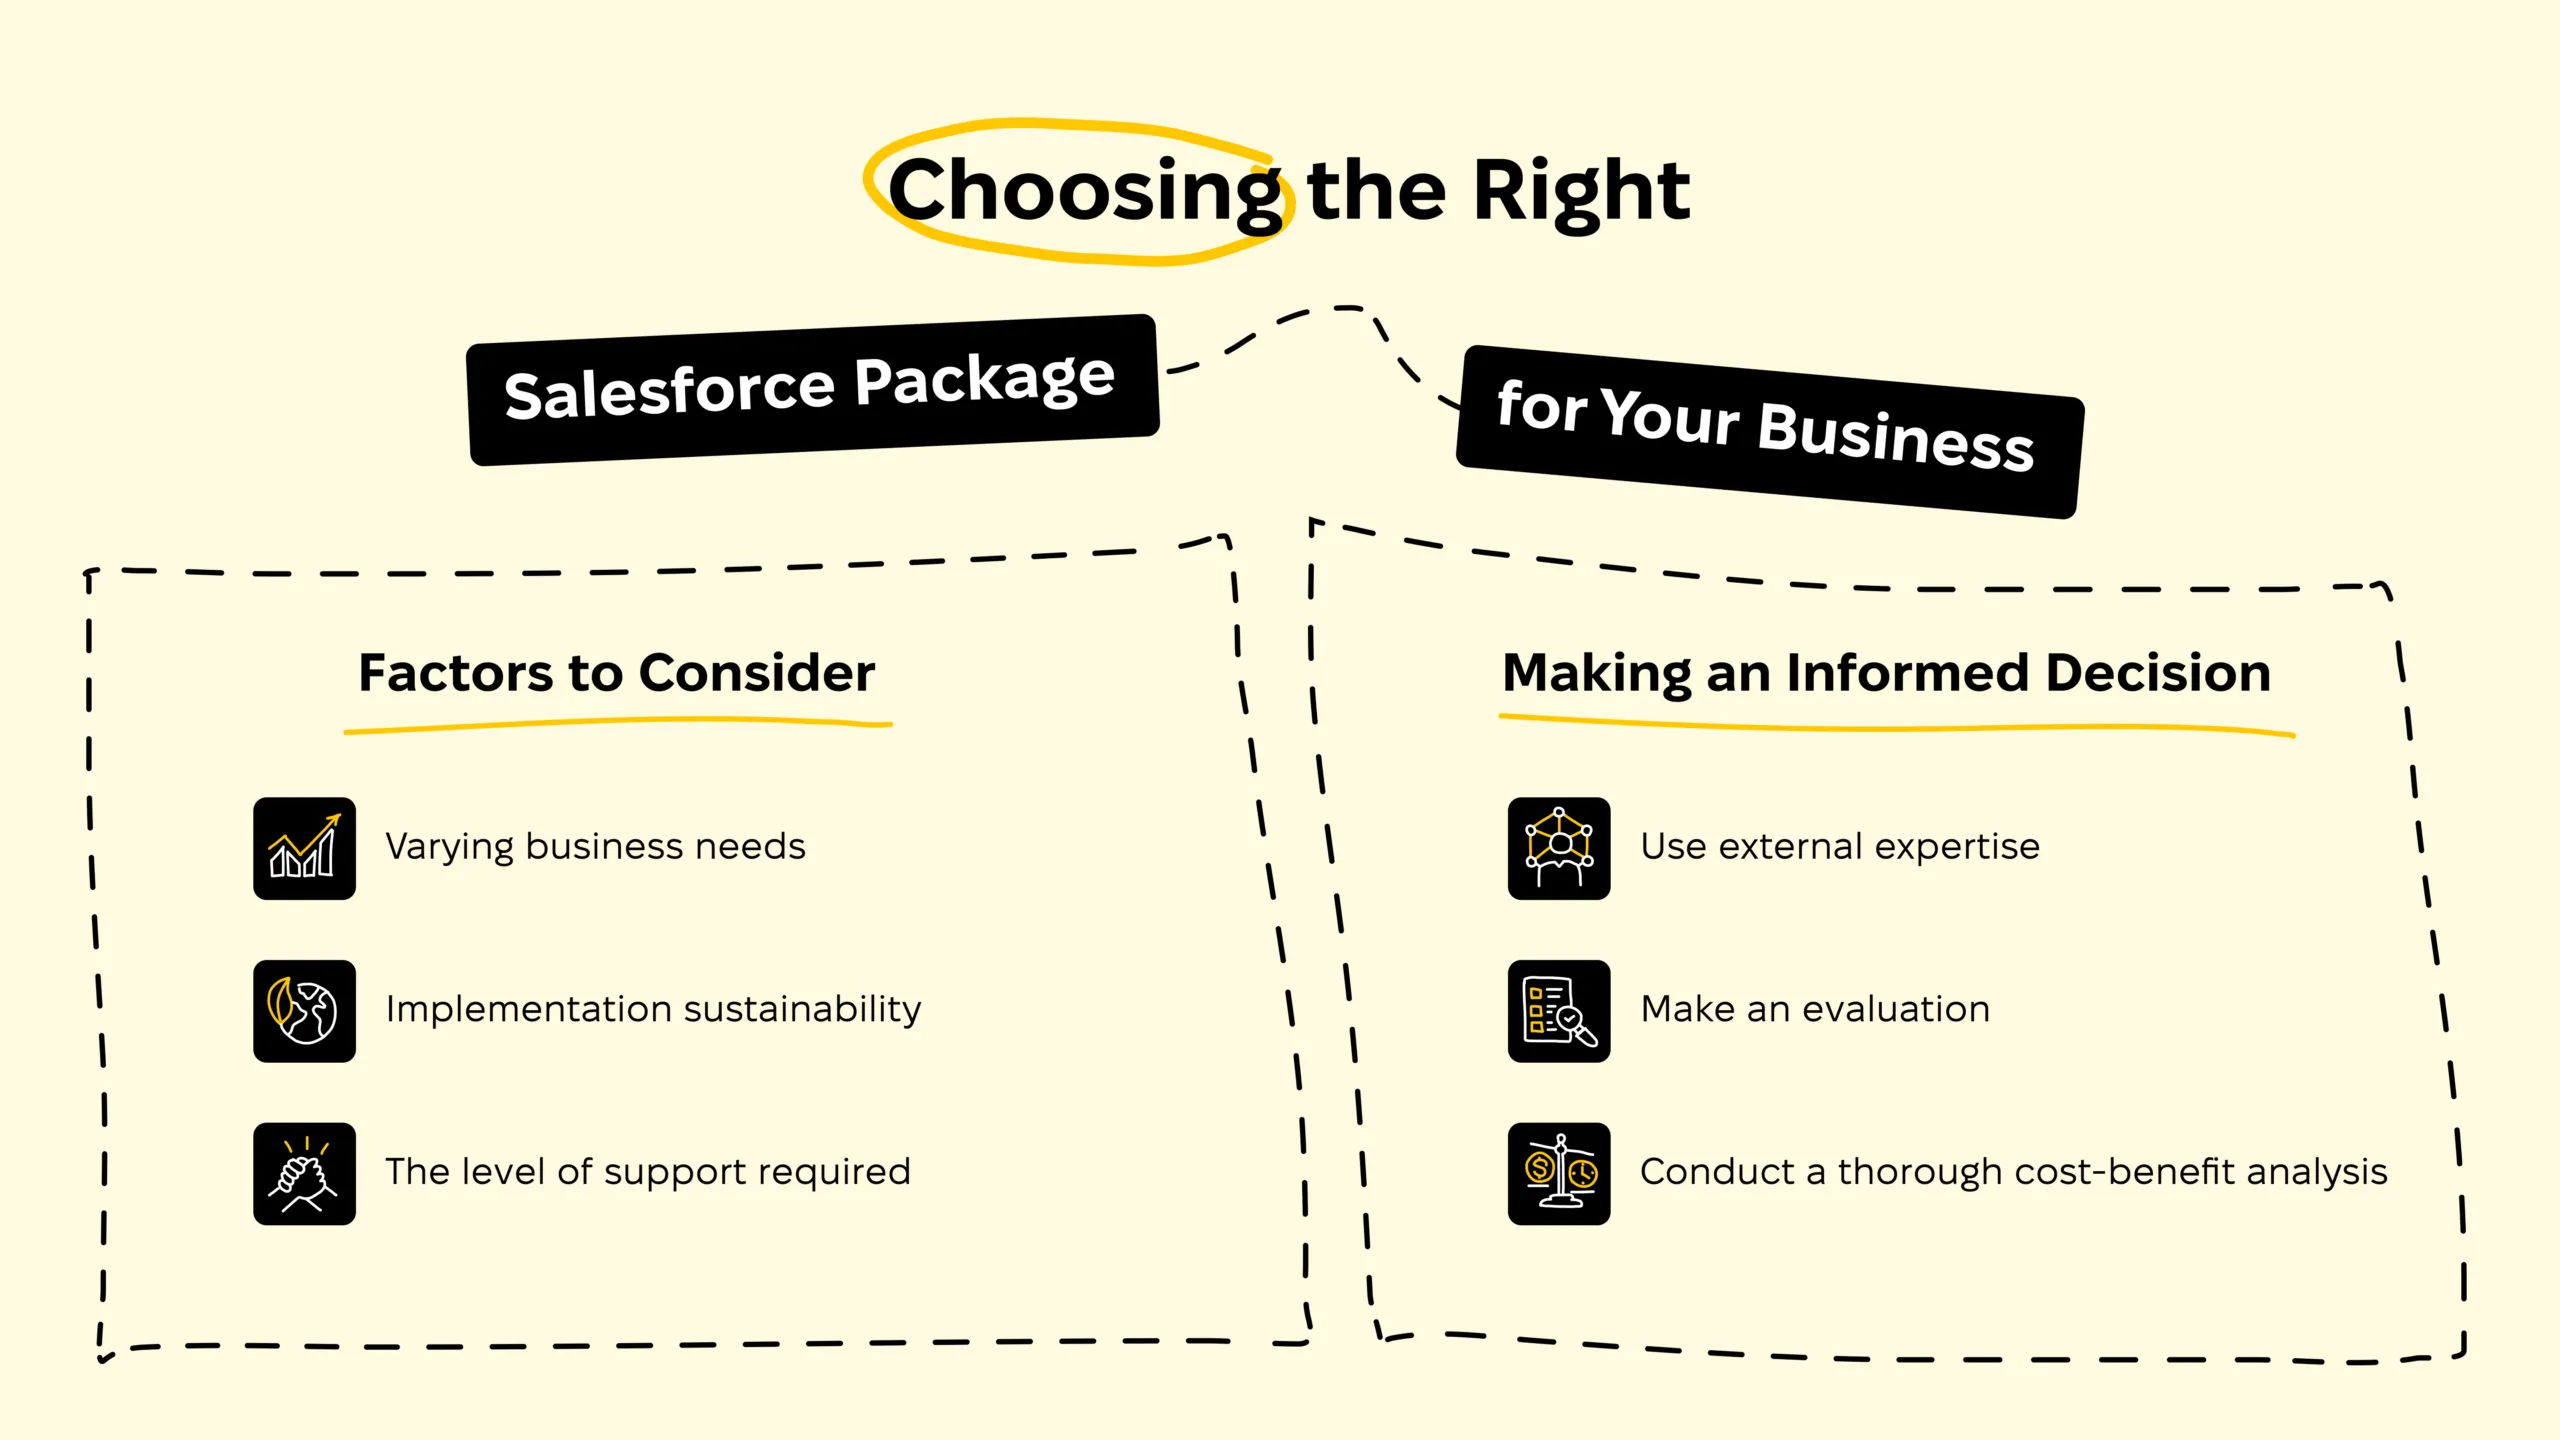 Choosing the Right salesforce package